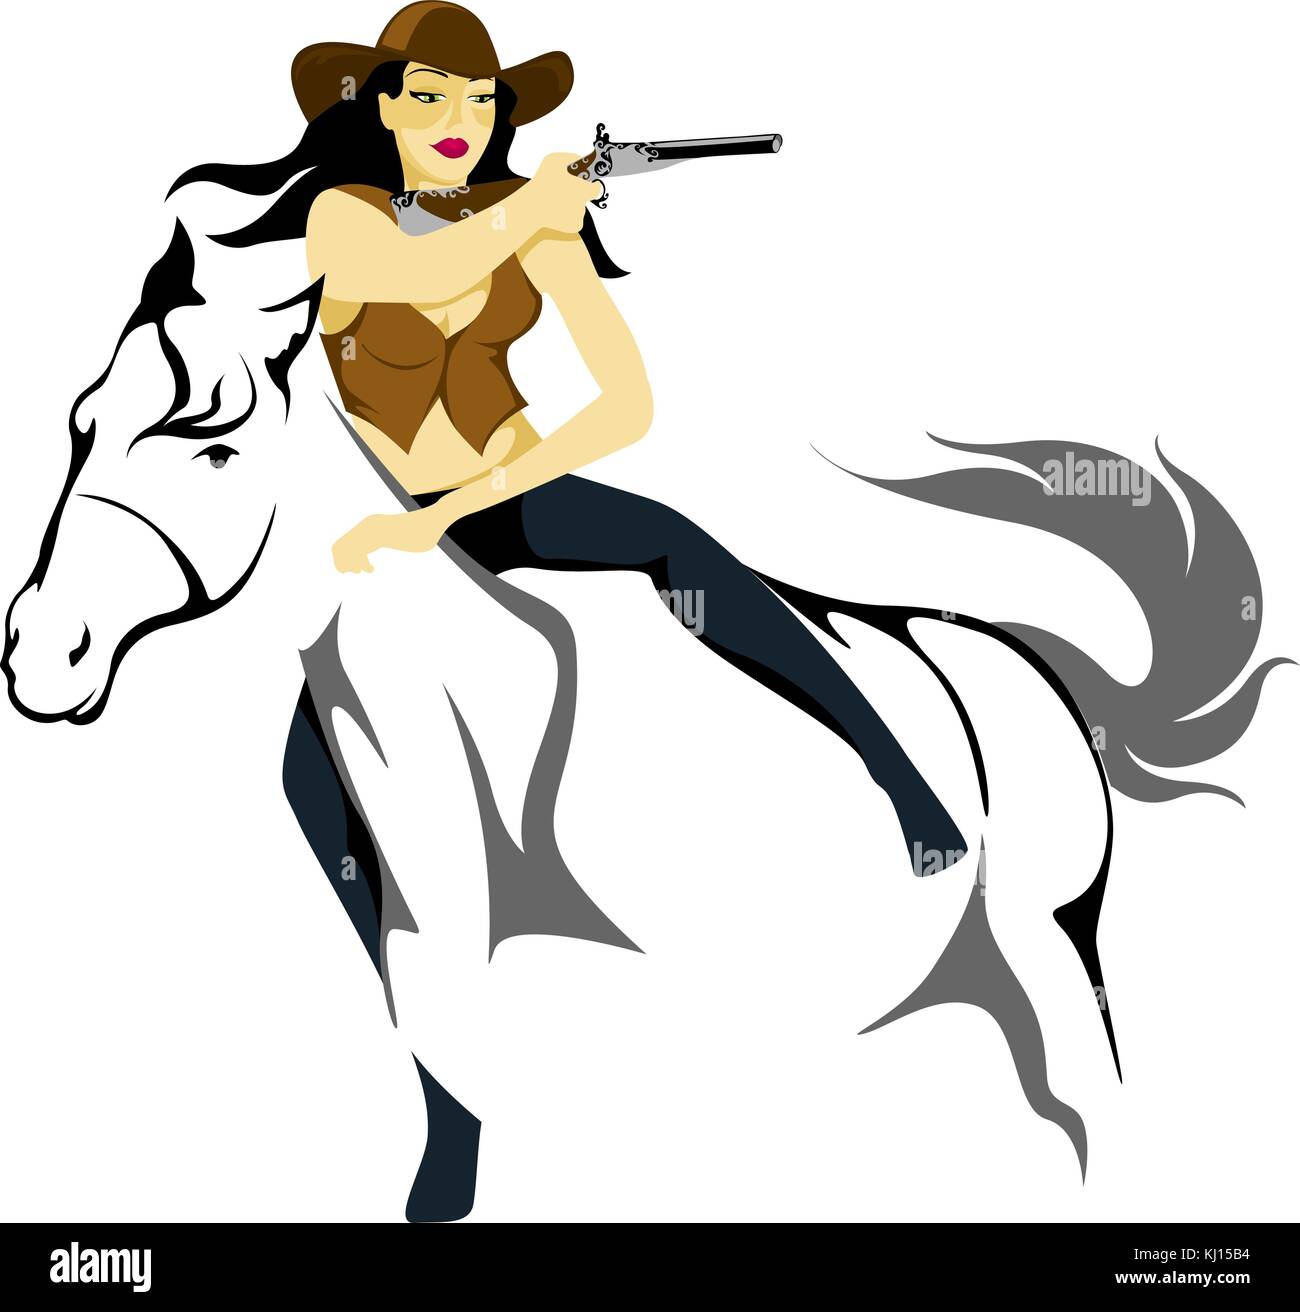 Cowgirl gunslinger riding a horse with a gun in hand Stock Vector